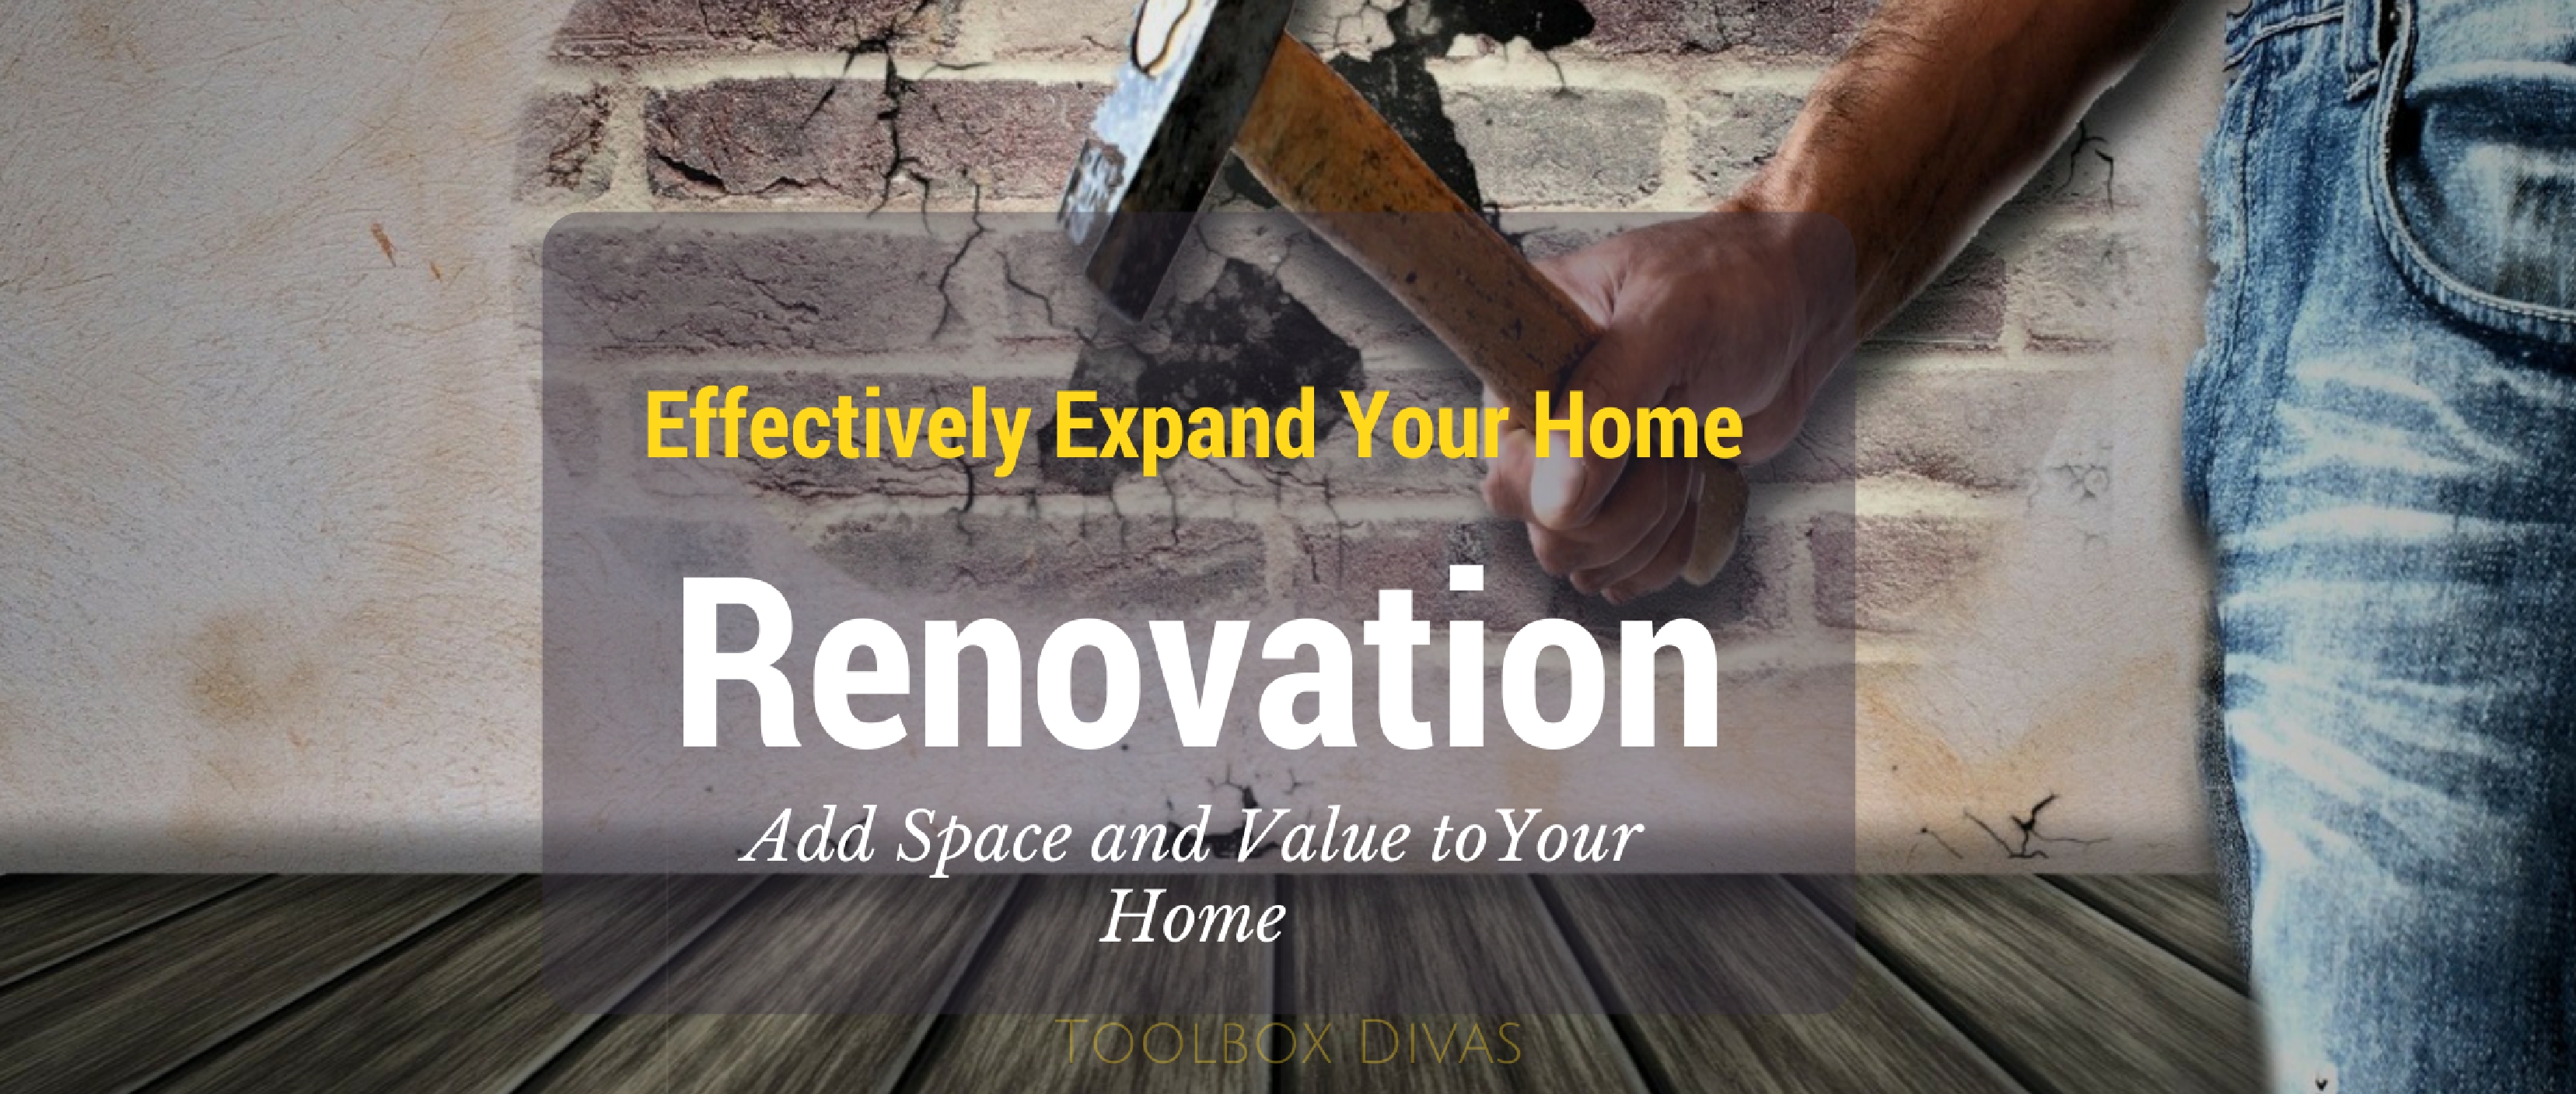 How to Effectively Expand Your Home